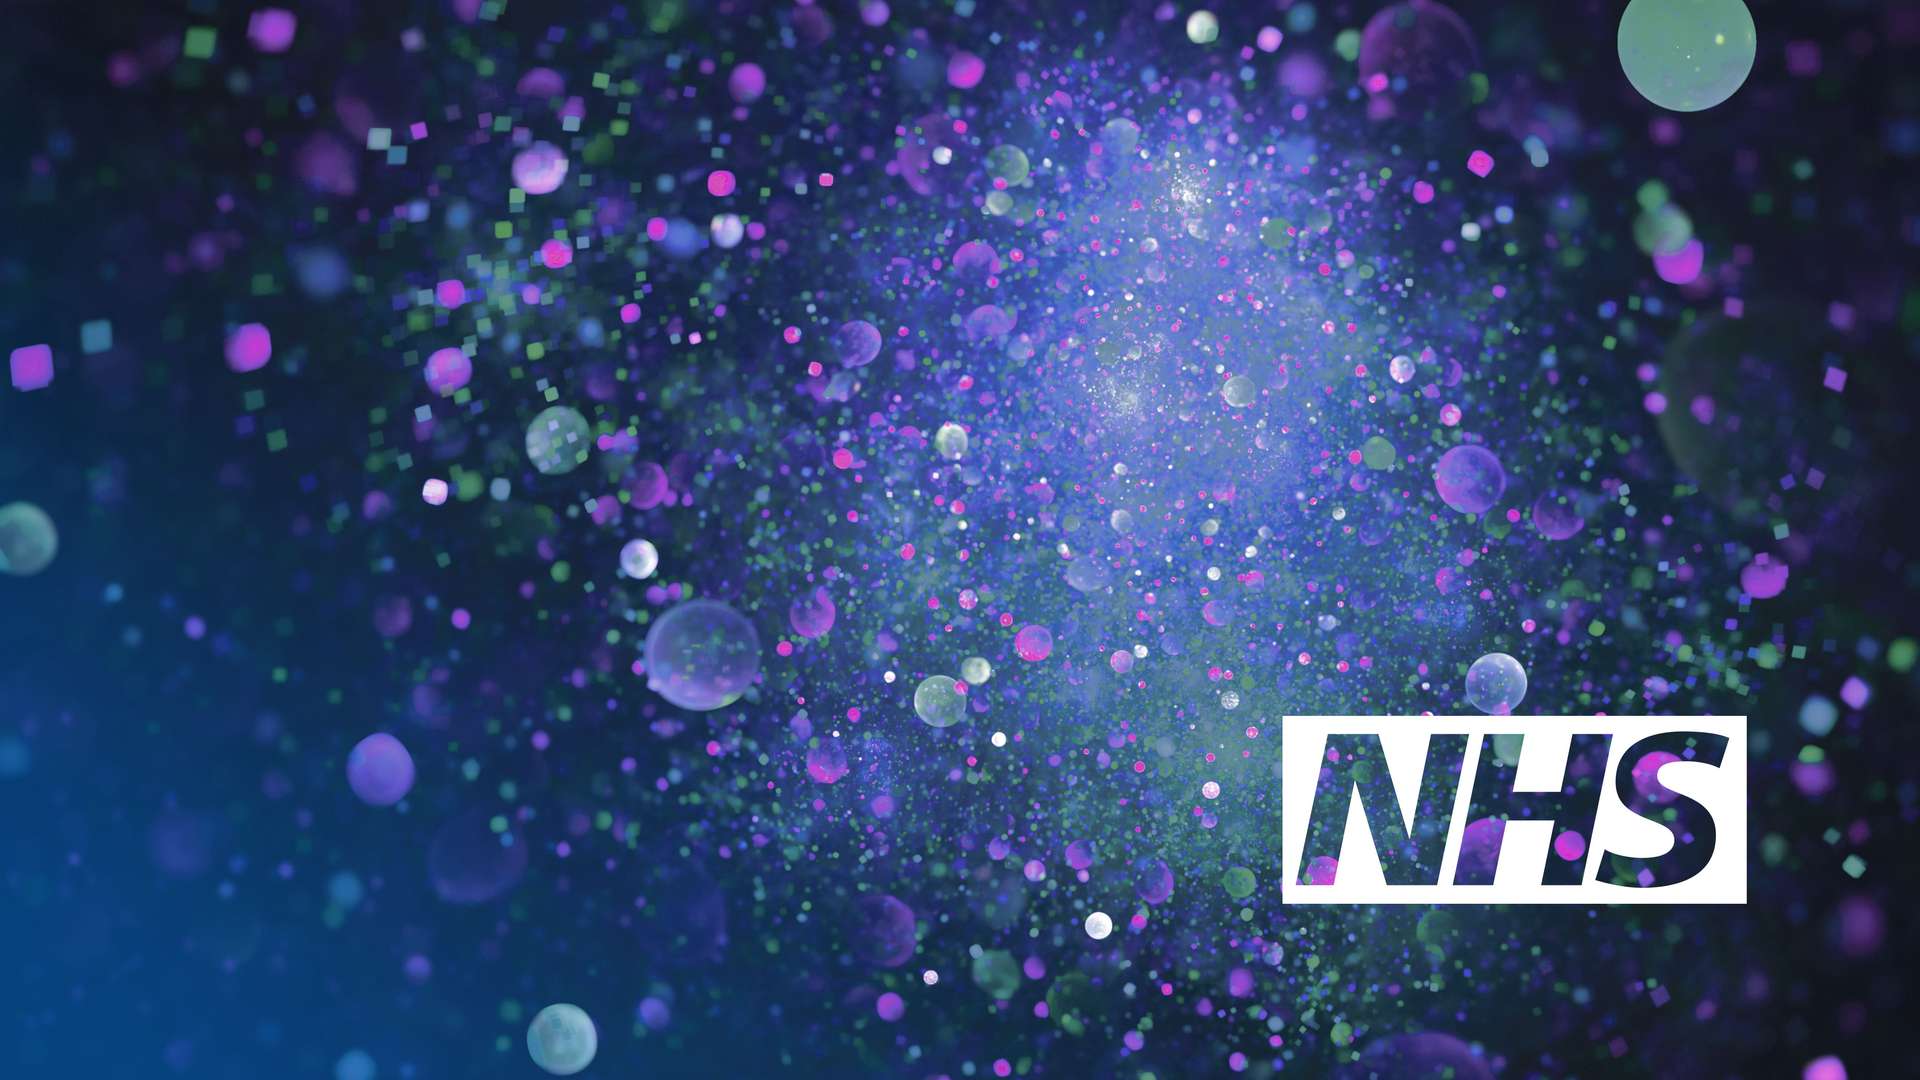 NHS logo over a blue and purple sparkling background